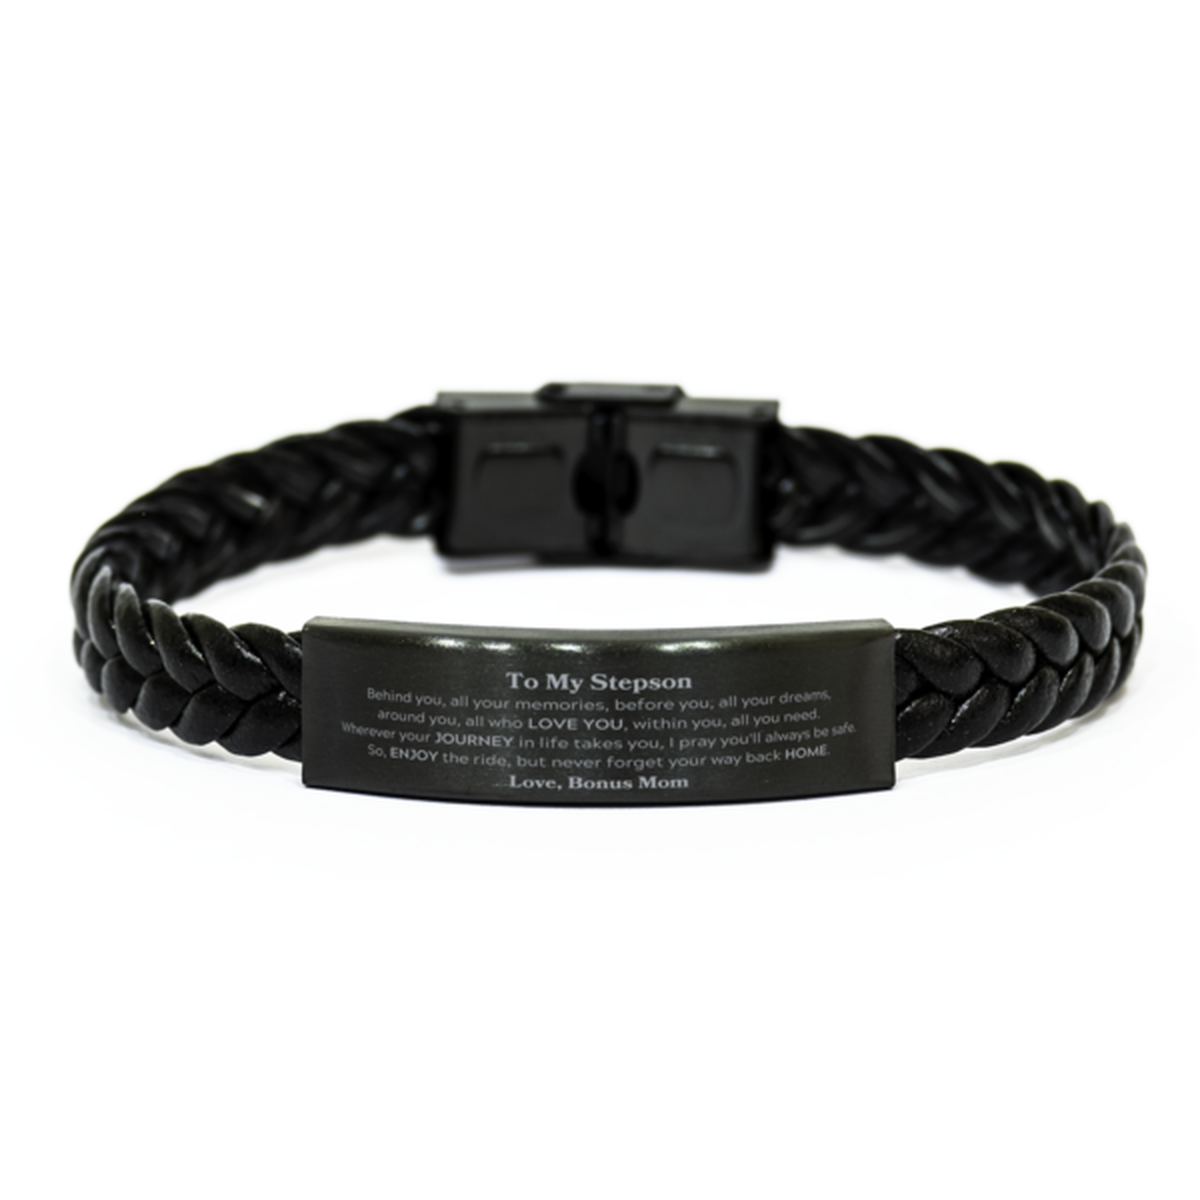 To My Stepson Graduation Gifts from Bonus Mom, Stepson Braided Leather Bracelet Christmas Birthday Gifts for Stepson Behind you, all your memories, before you, all your dreams. Love, Bonus Mom